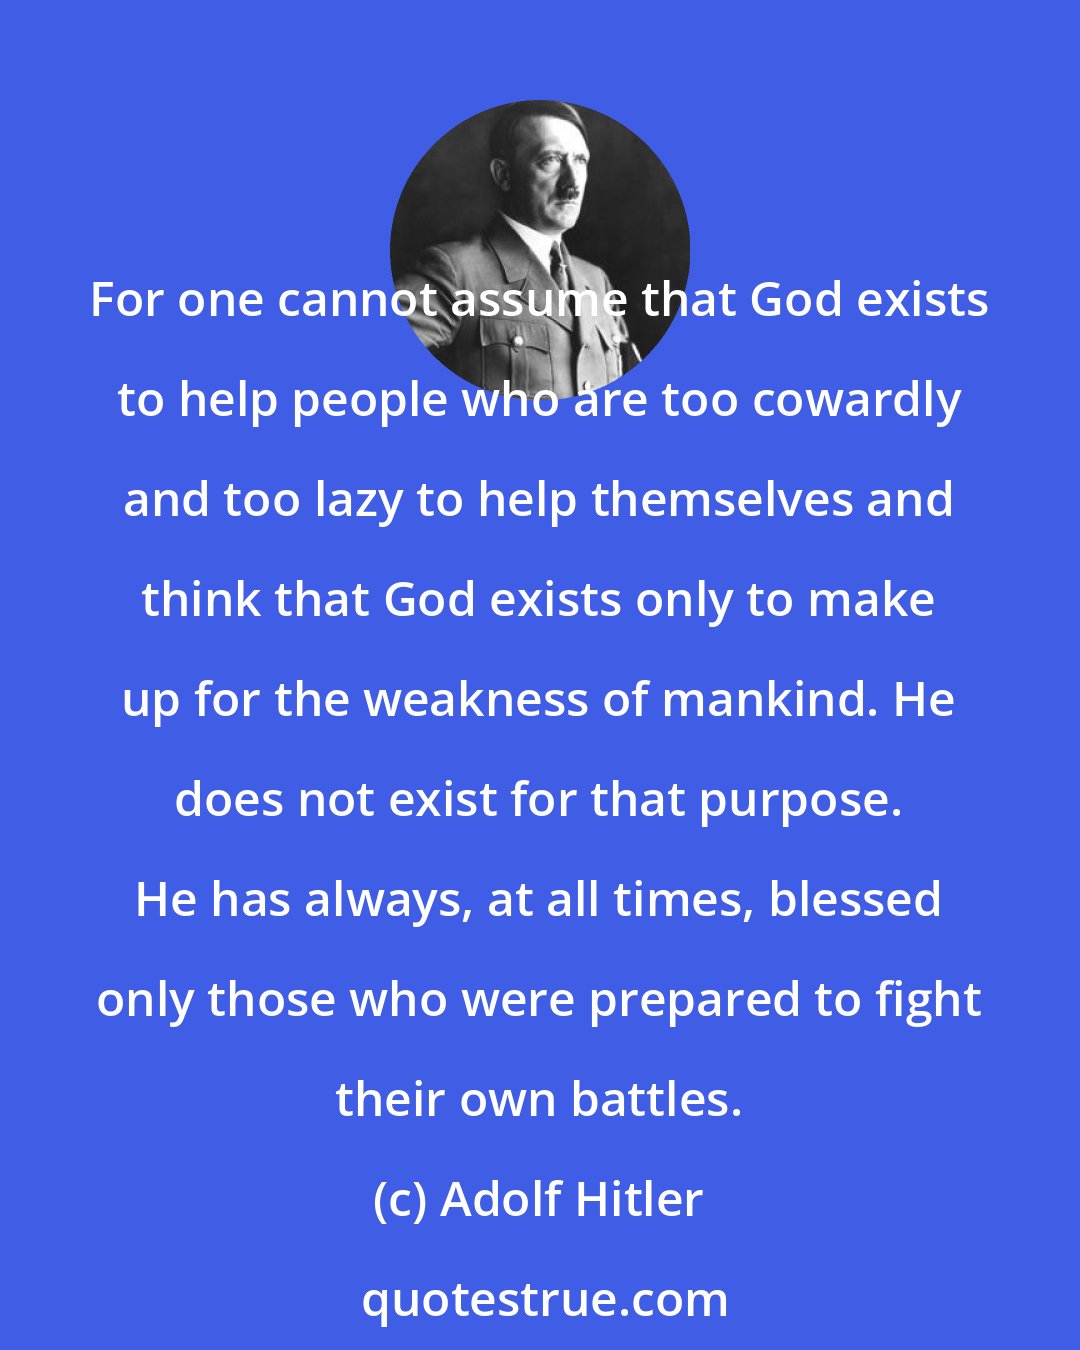 Adolf Hitler: For one cannot assume that God exists to help people who are too cowardly and too lazy to help themselves and think that God exists only to make up for the weakness of mankind. He does not exist for that purpose. He has always, at all times, blessed only those who were prepared to fight their own battles.